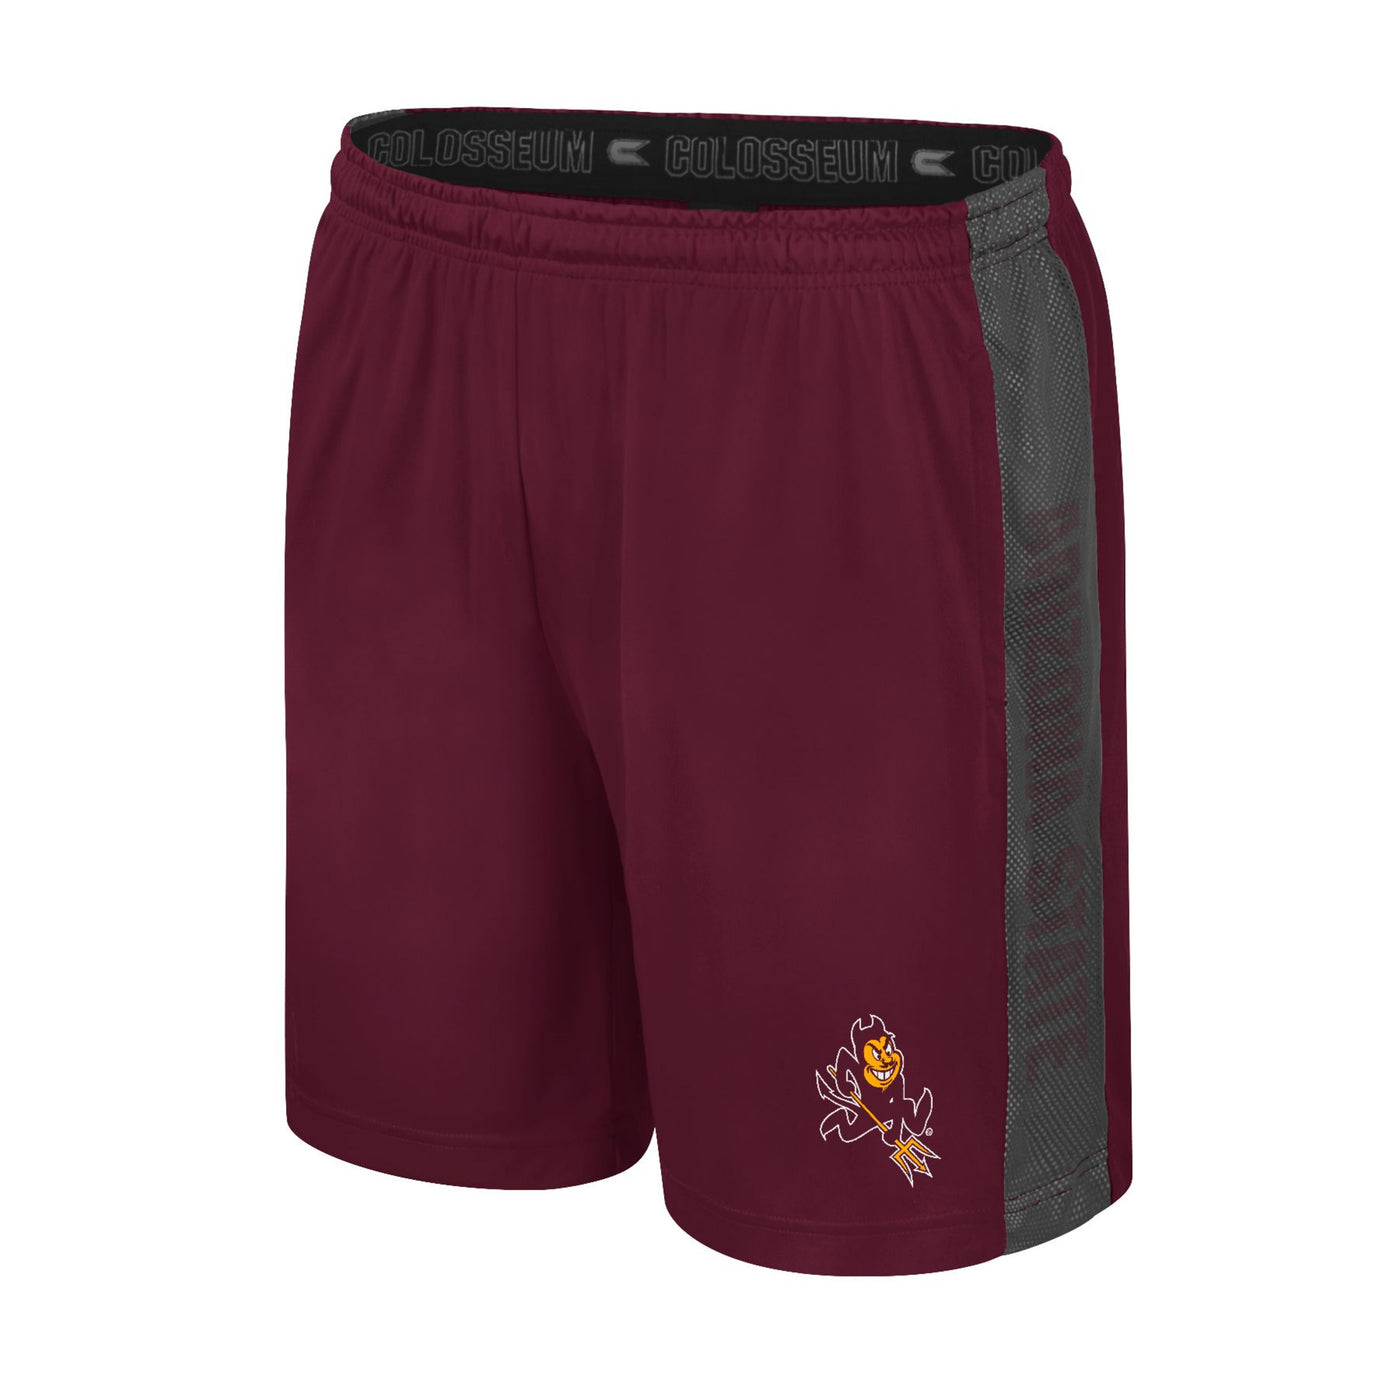 ASU maroon mens shorts with a small sparky logo at the bottom. Down the side is a mesh material overlapping the maroon text 